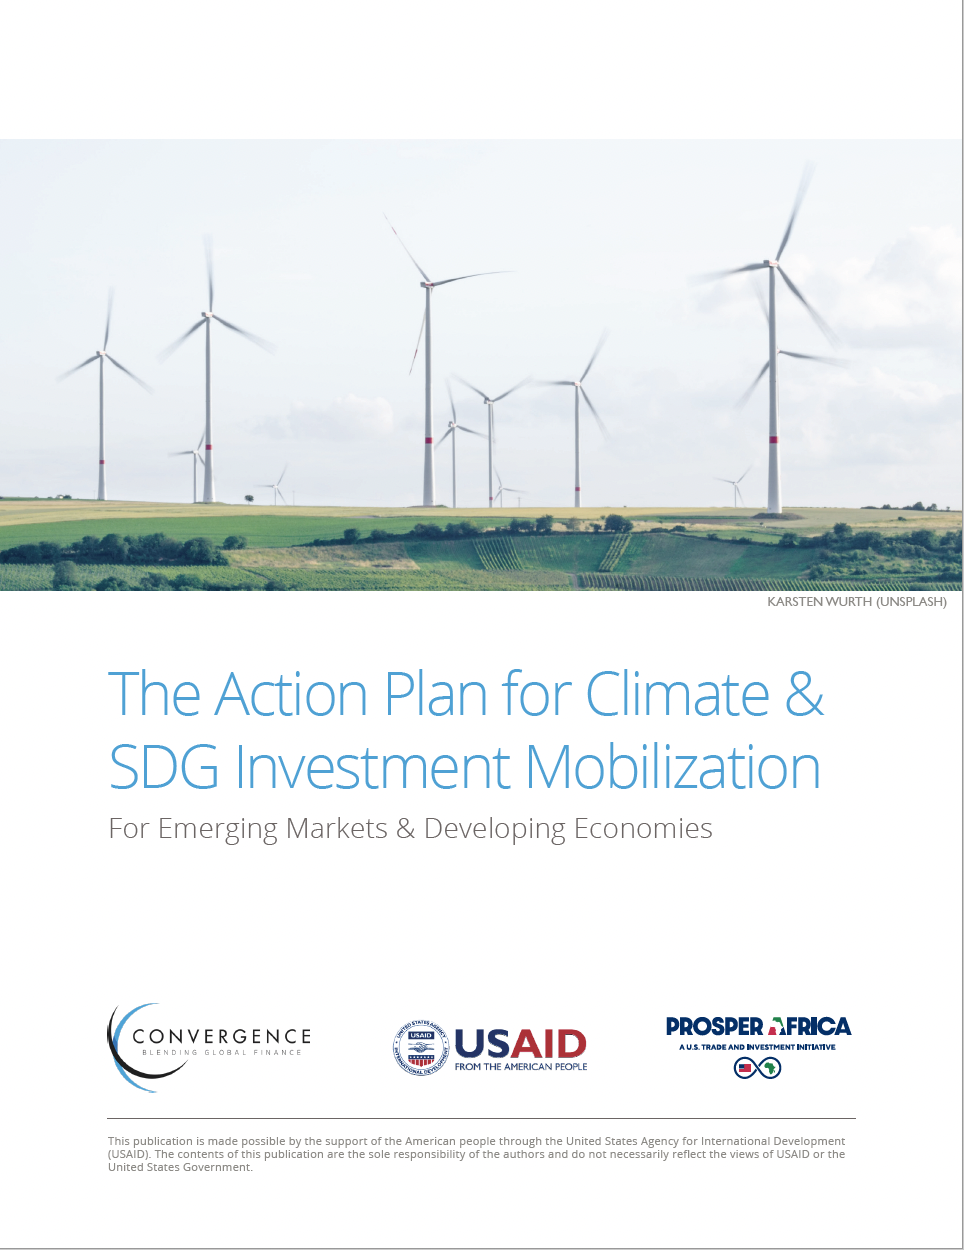 The Action Plan for Climate and SDG Investment Mobilization